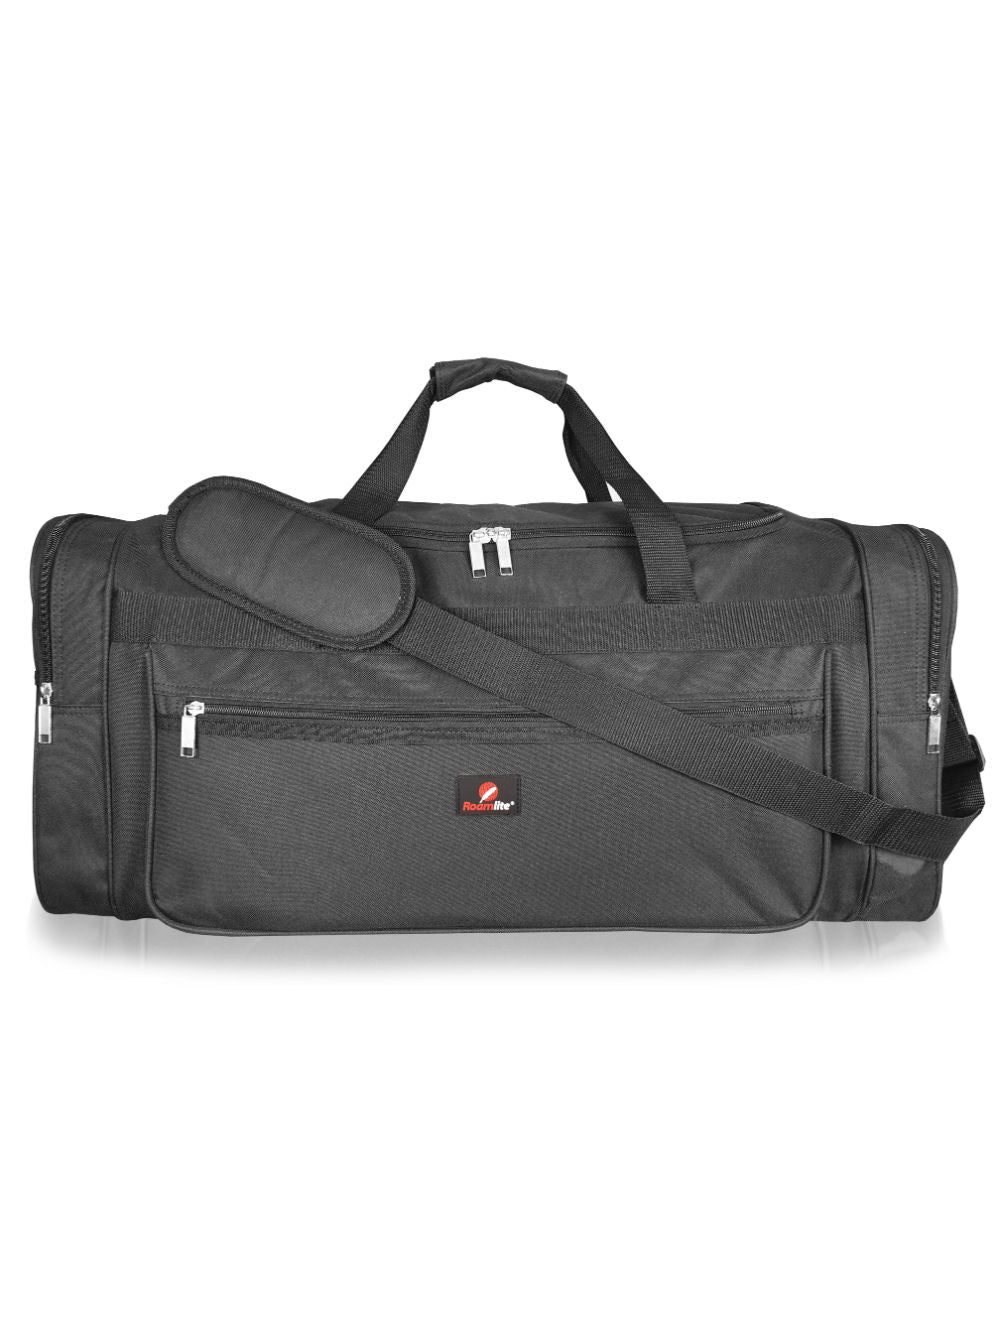  Roamlite United Airlines Personal Item of Hand Luggage Size  Cabin Approved Travel Holdalls, Small Carry On Duffel Bags - 15 inch x10x8,  Waterproof Polyester 20 Litre RL59K (Black)